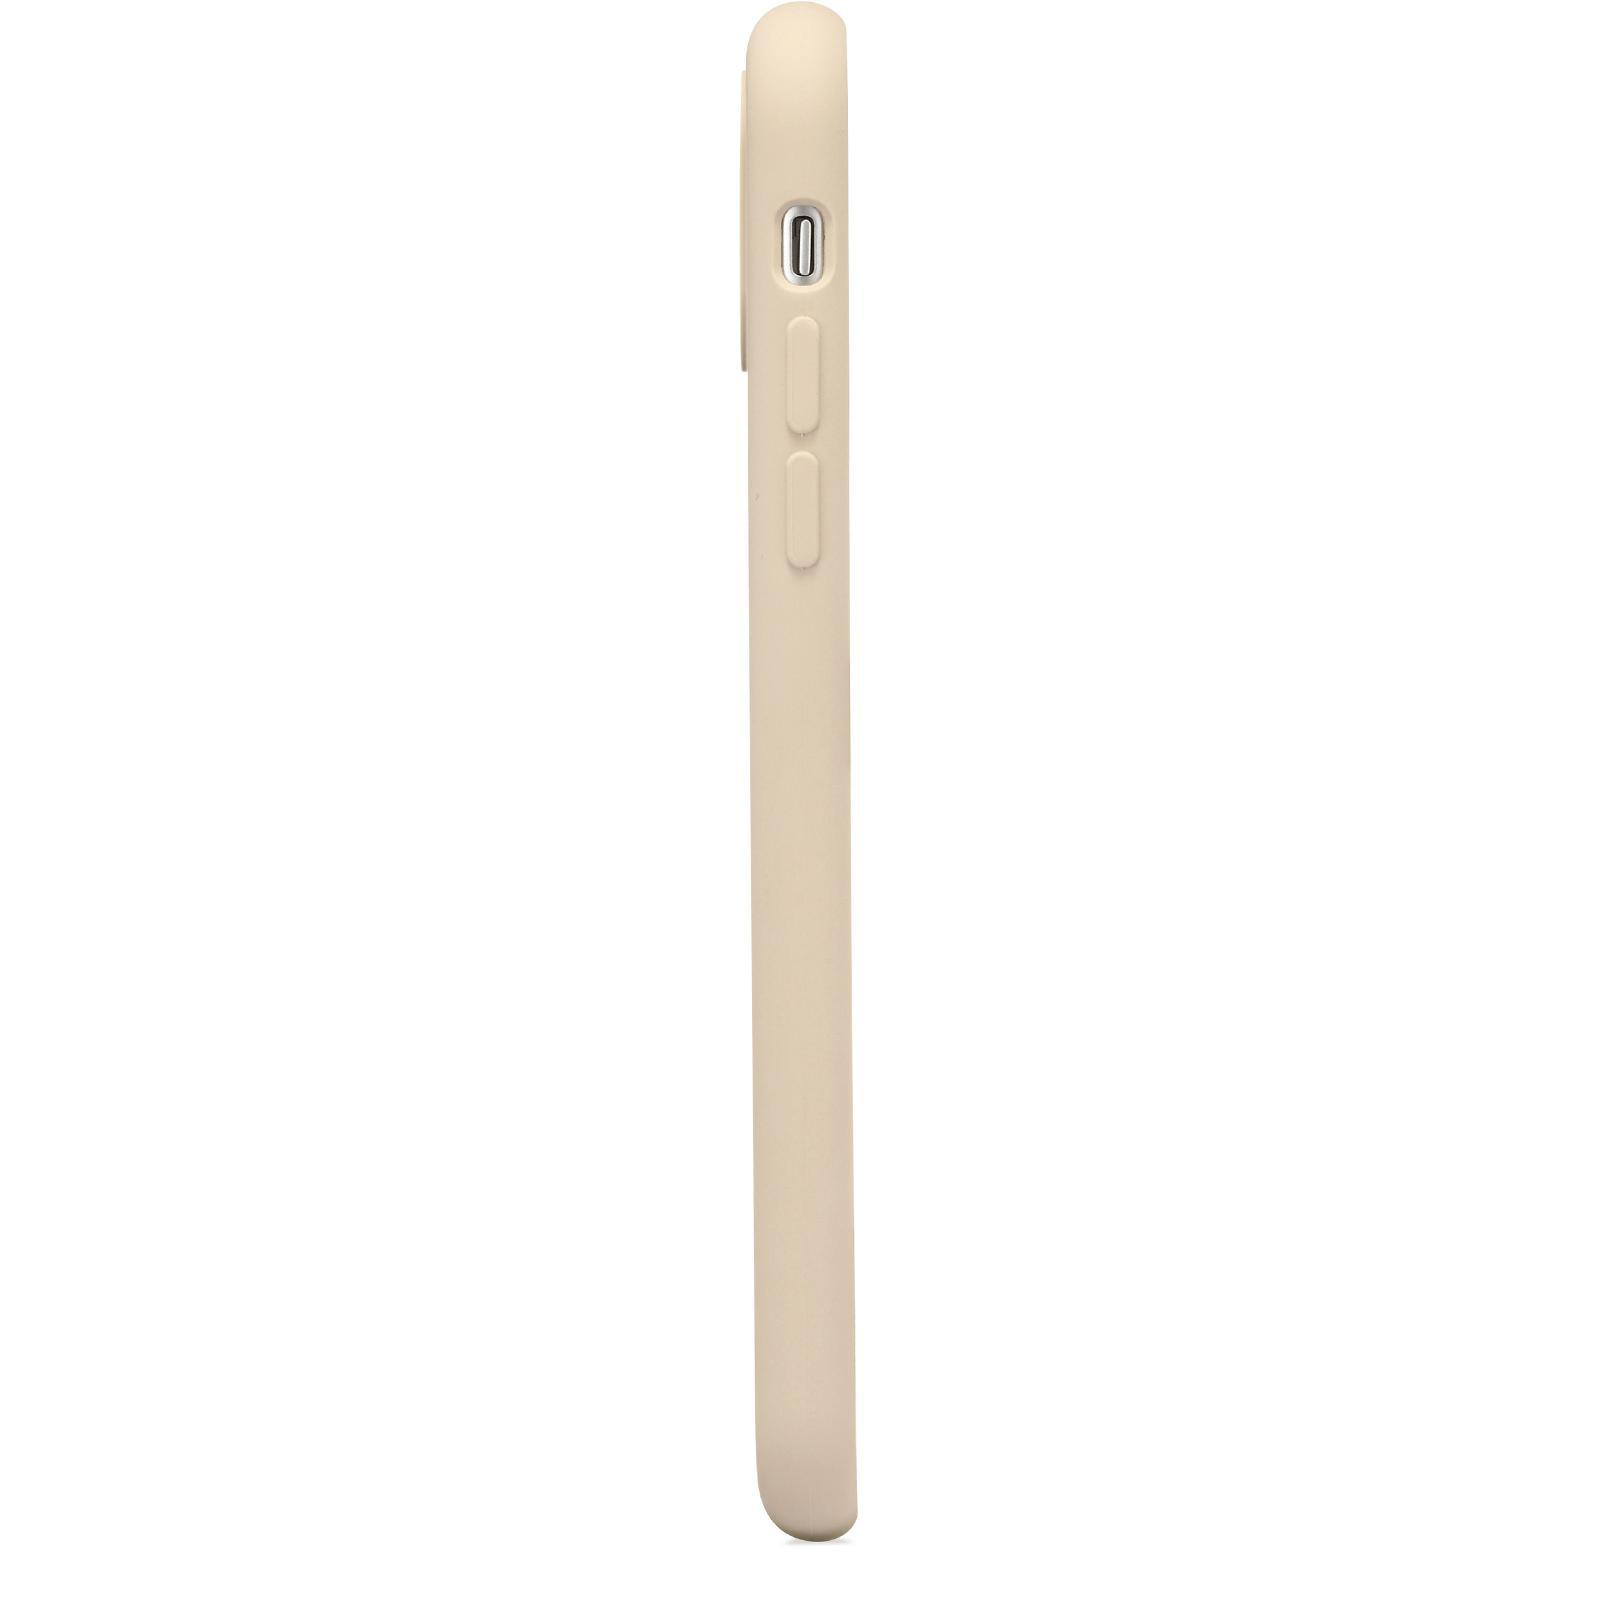 HOLDIT Silicone, Bookcover, Apple, iPhone 11 XR, Beige